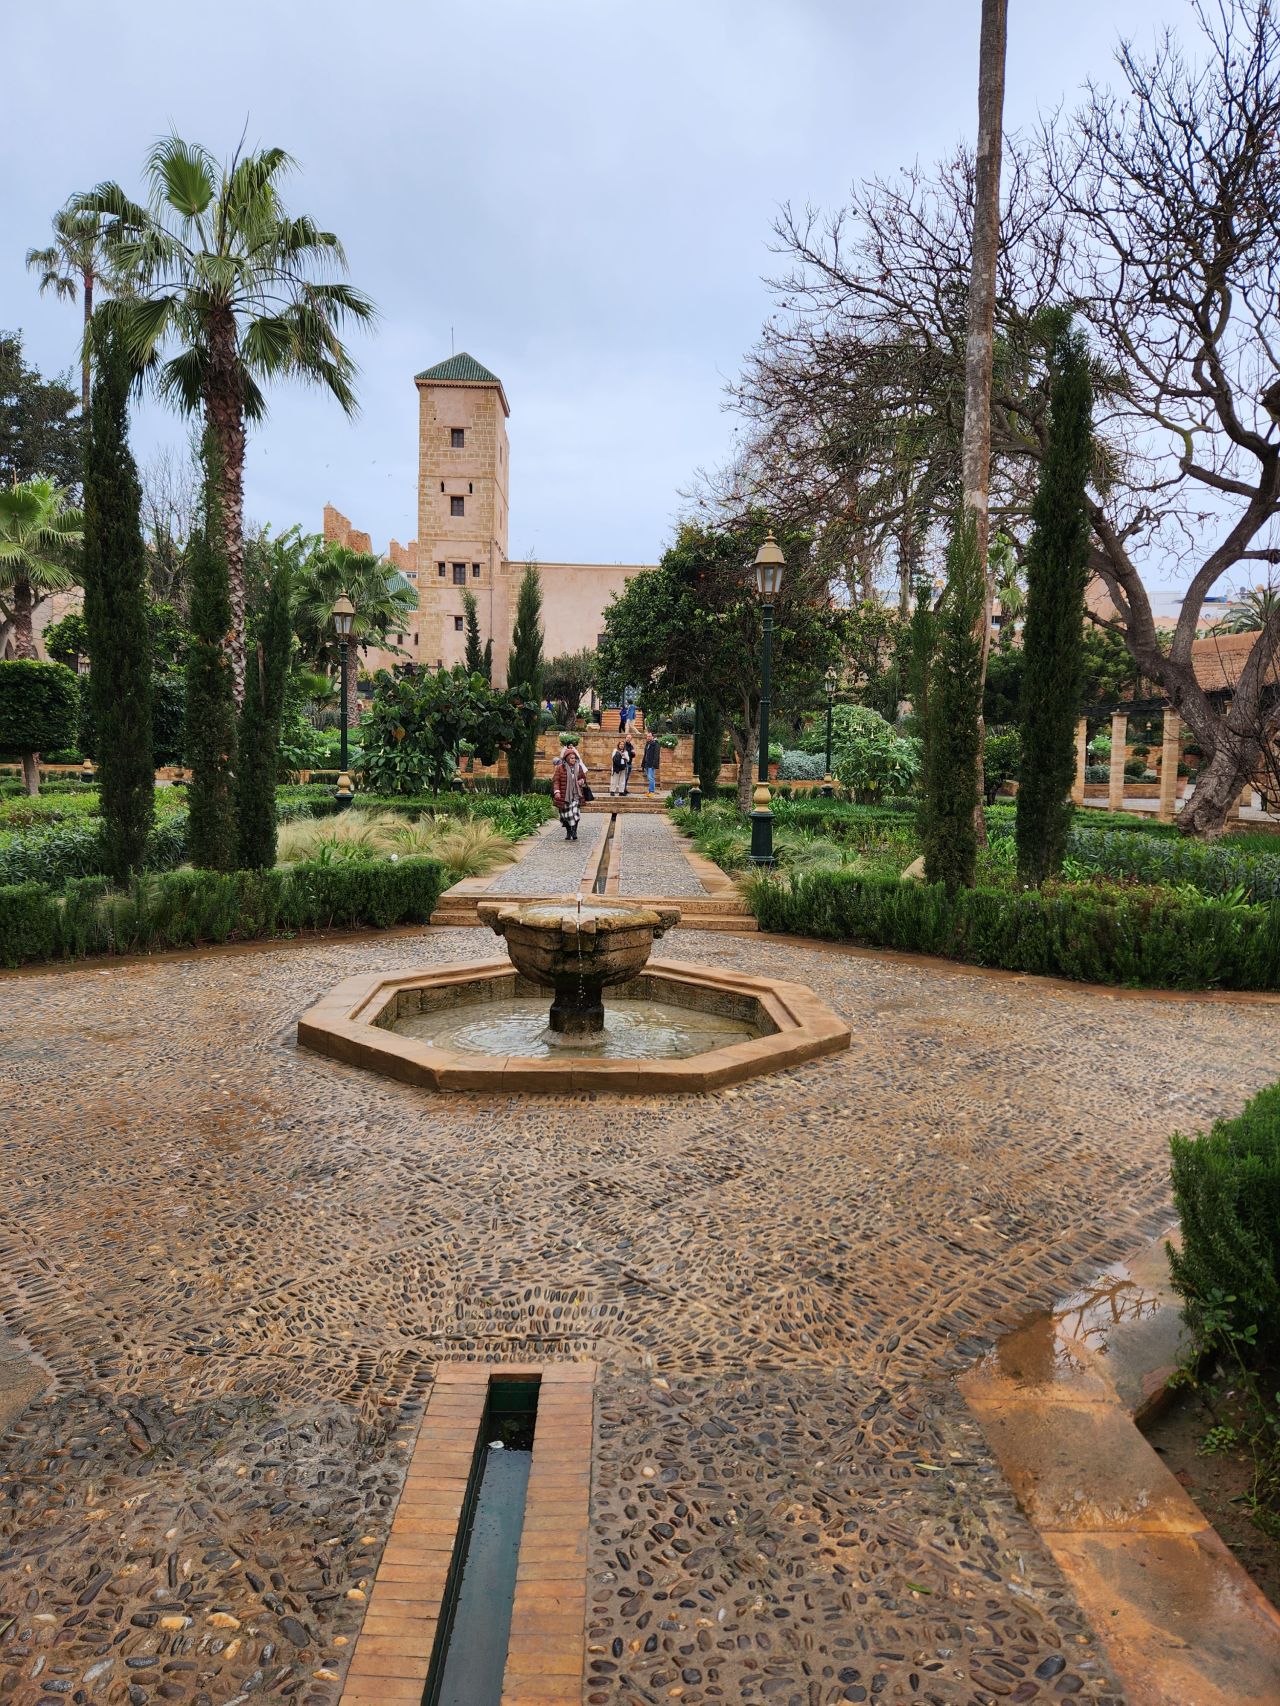 The Andalusian Gardens in Rabat, Morocco.